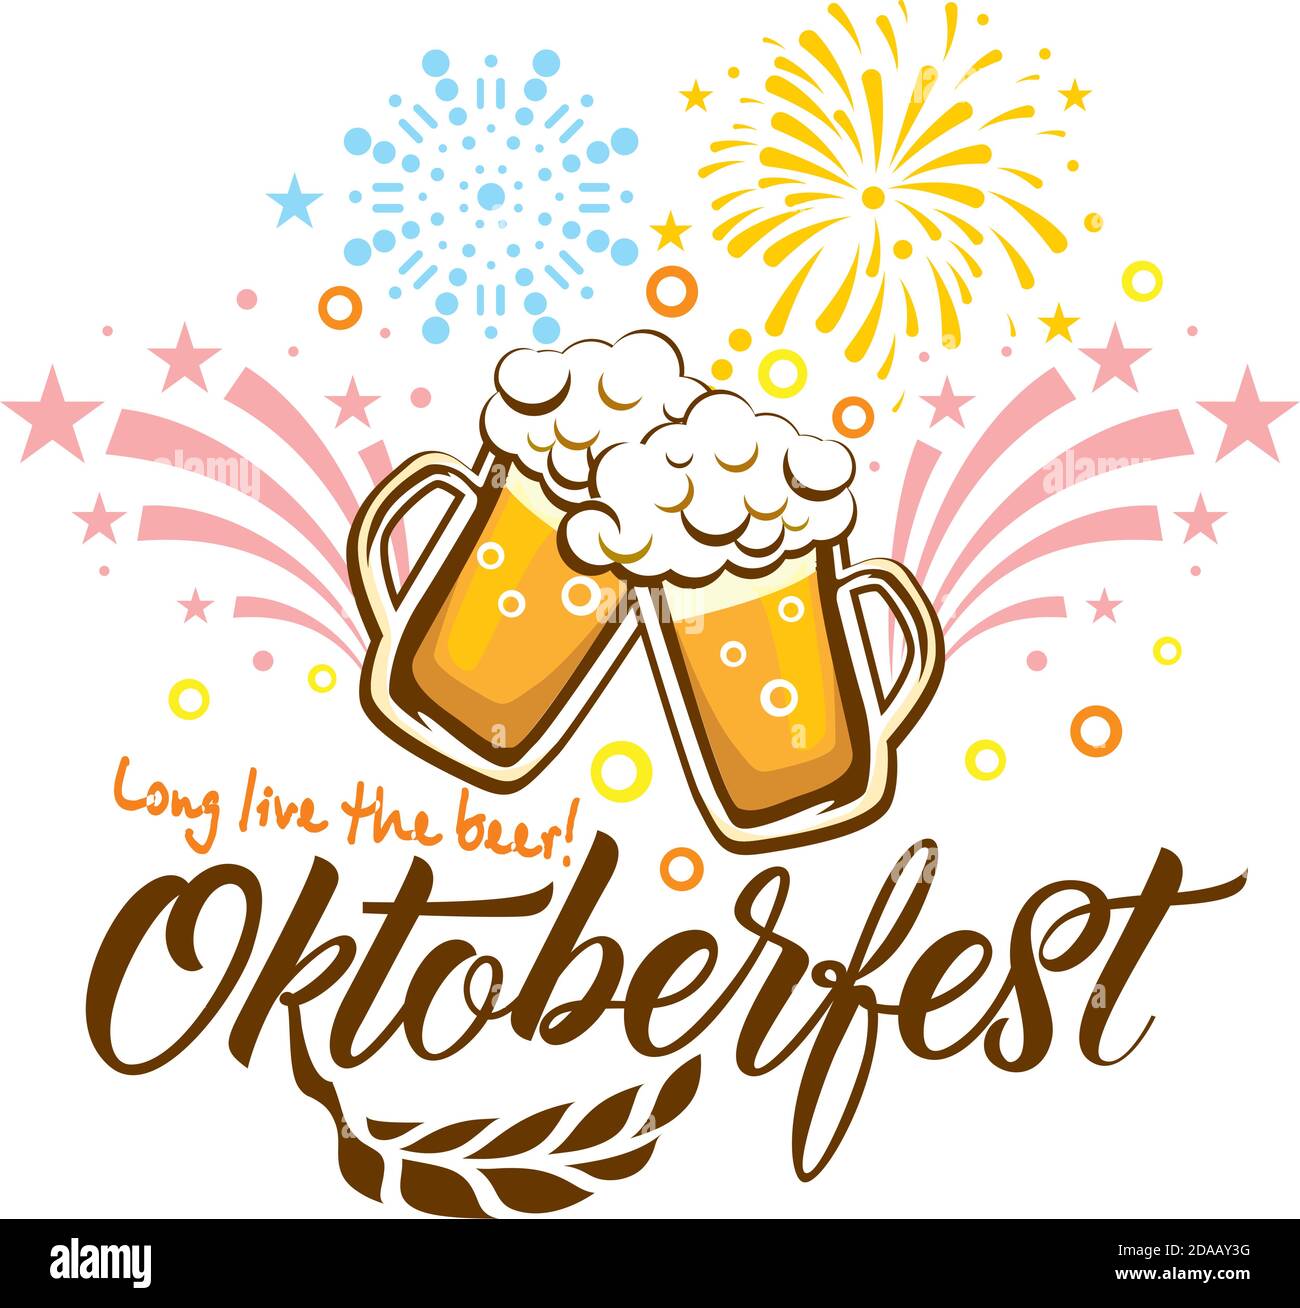 Oktoberfest beer festival fireworks - poster, greeting card with beer mugs, wheat ears and slogan Stock Vector